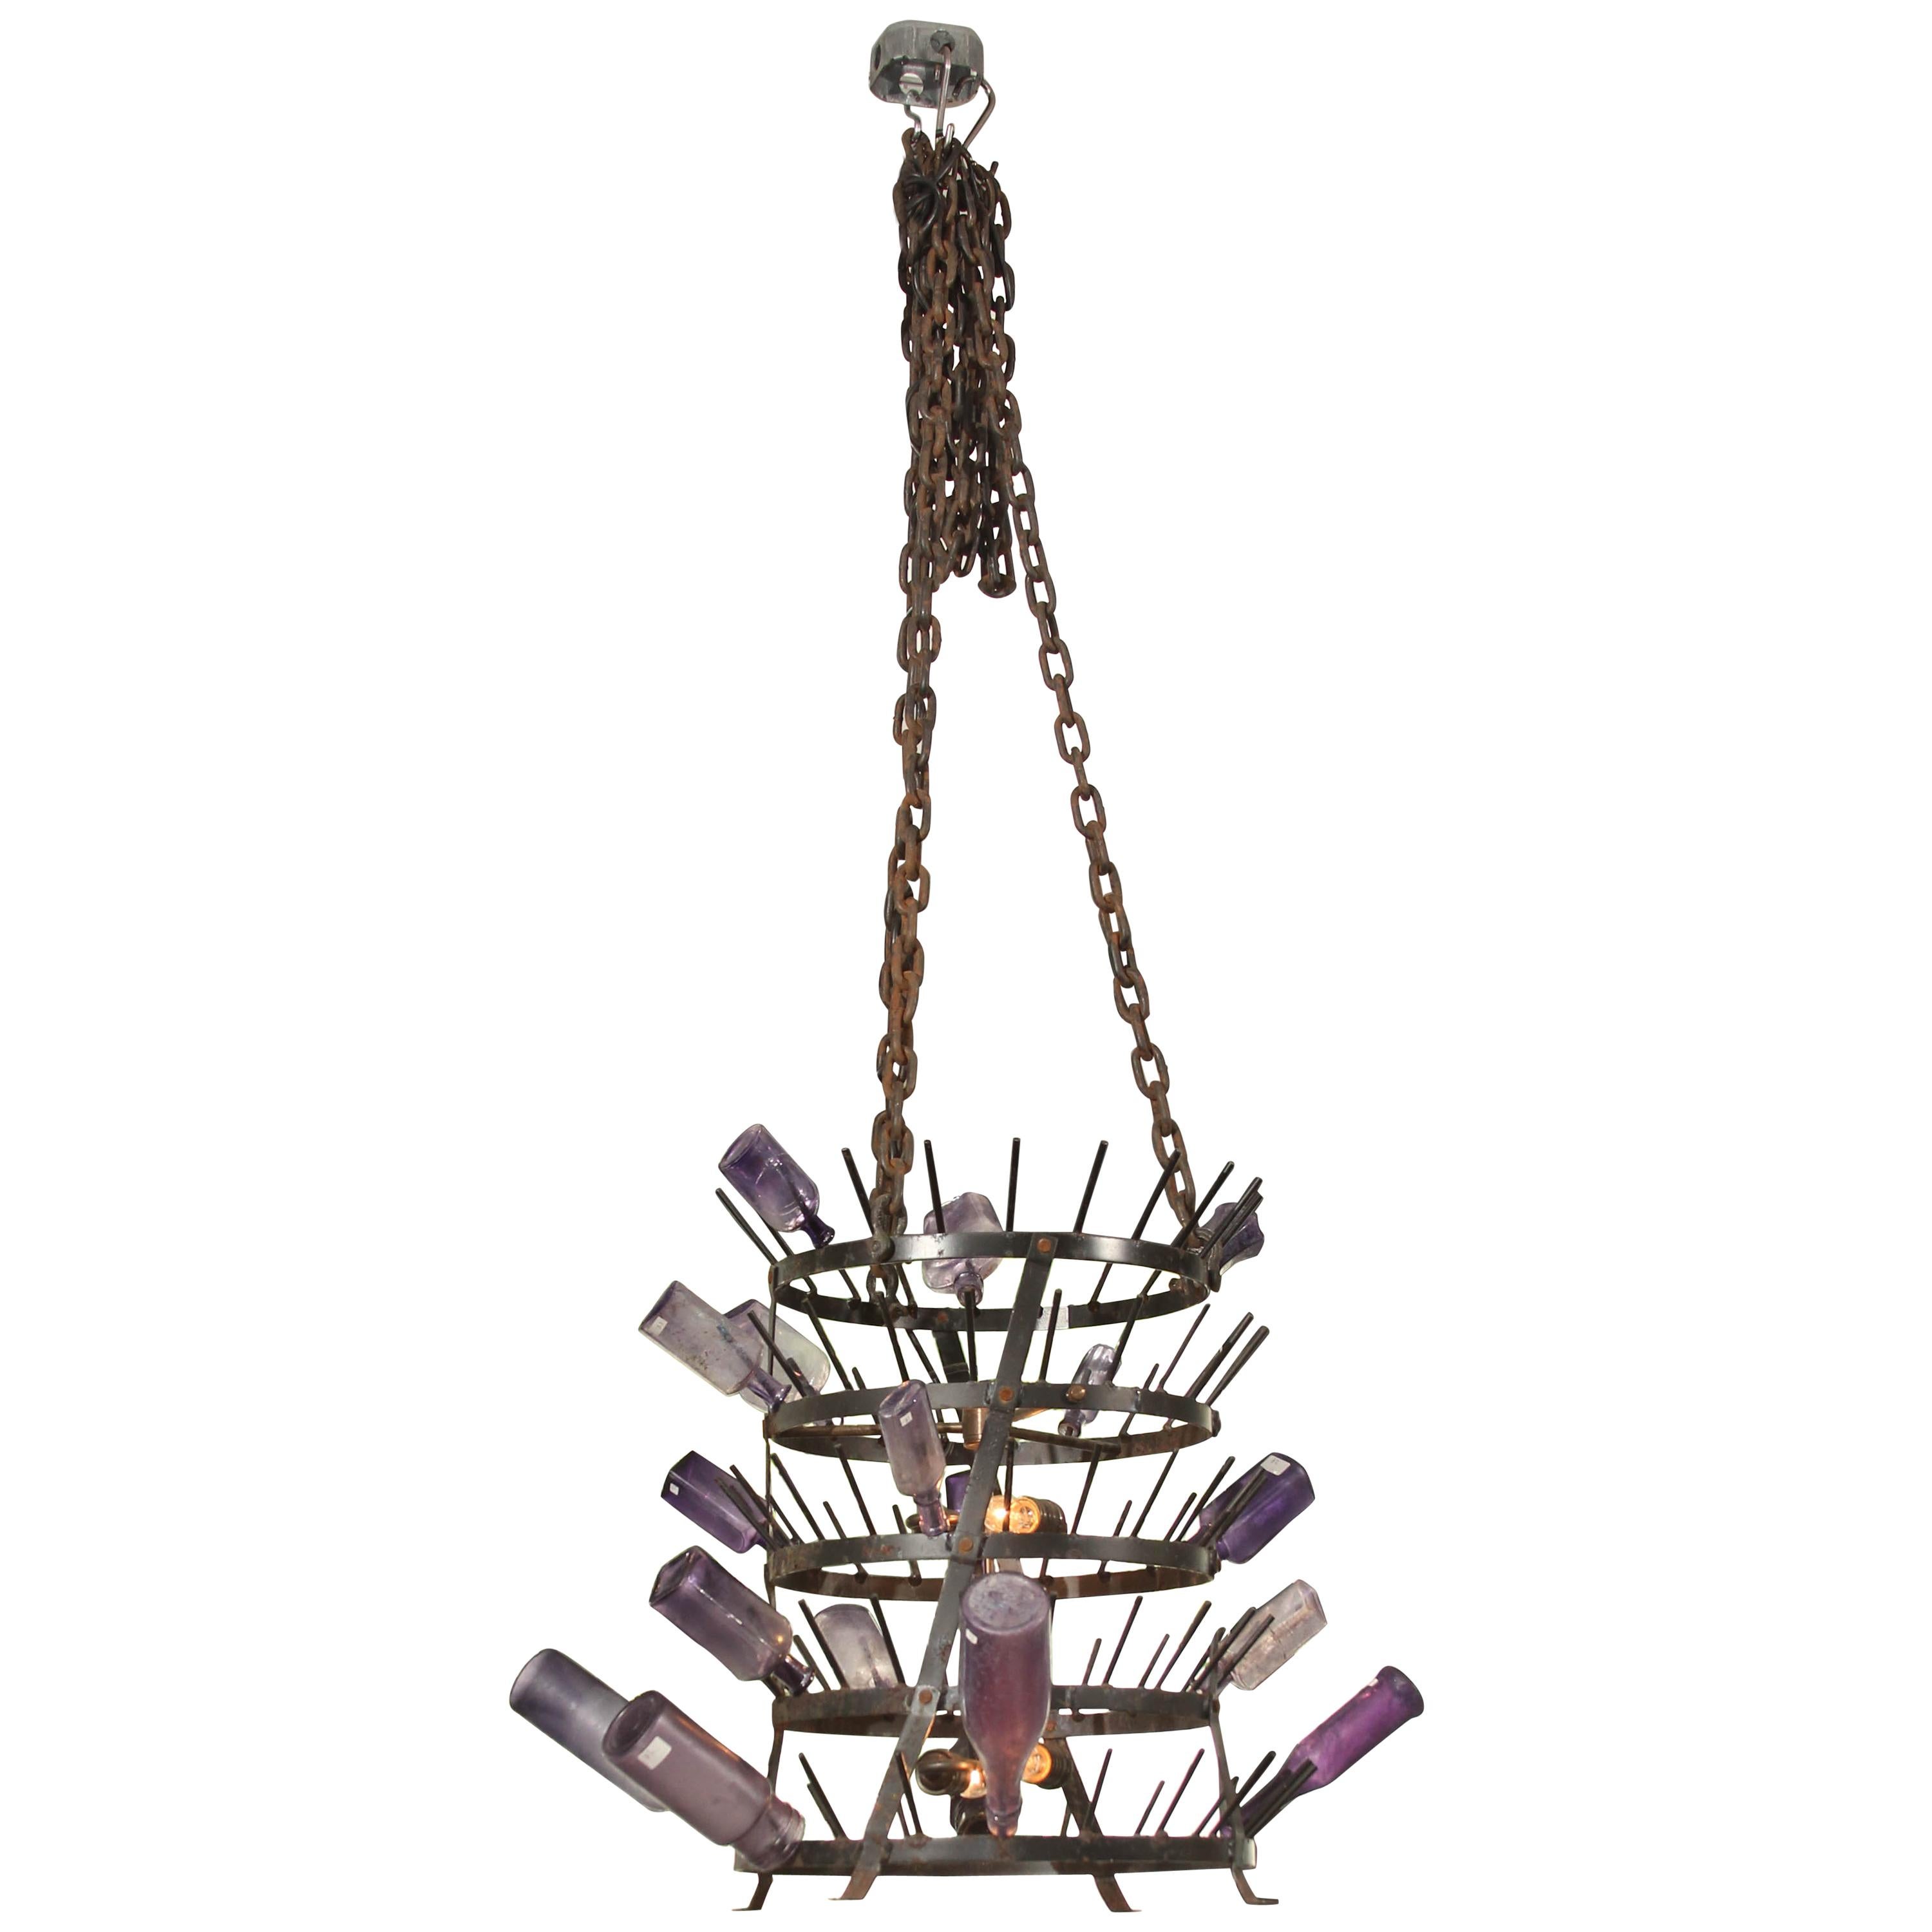 Antique Iron French Bottle Rack Chandelier